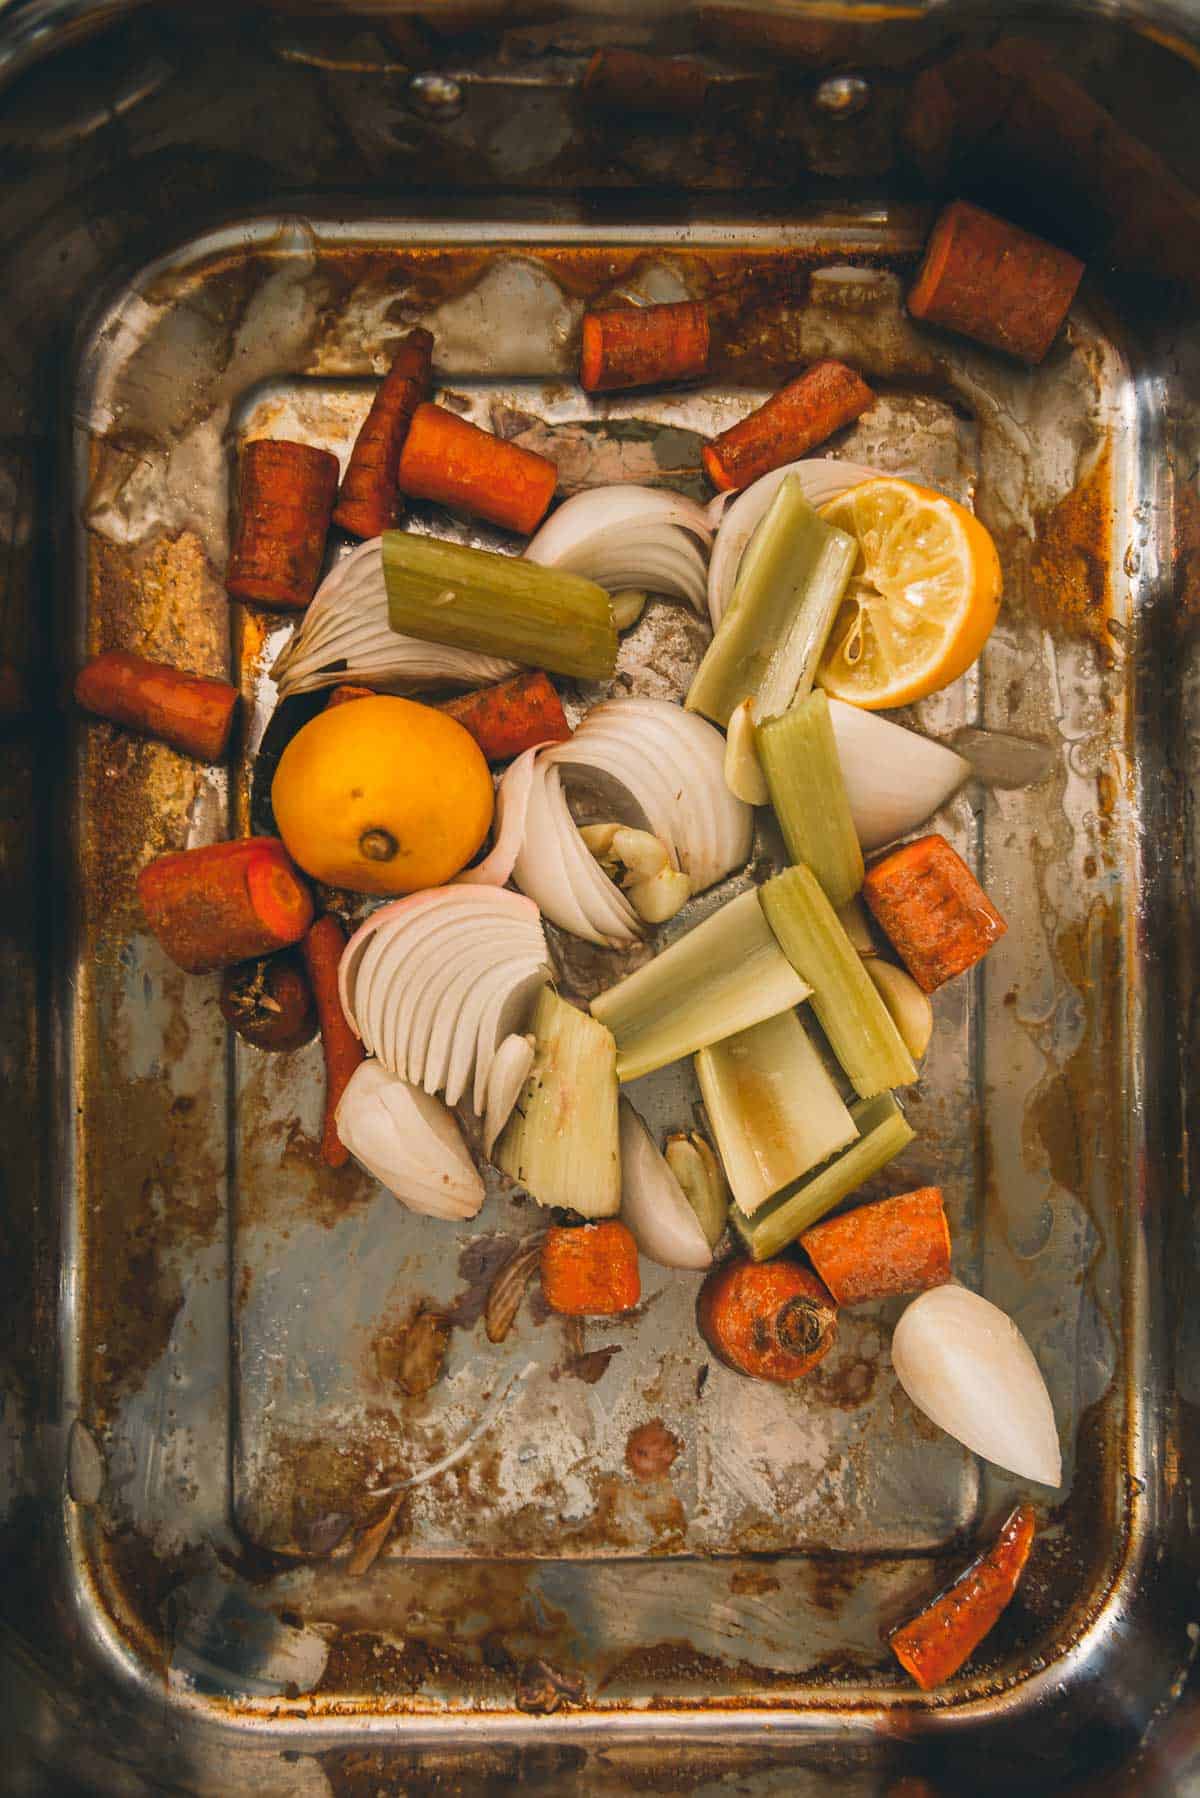 Bottom of pan showing roasted veggies from under the turkey and brown bits stuck to the bottom.